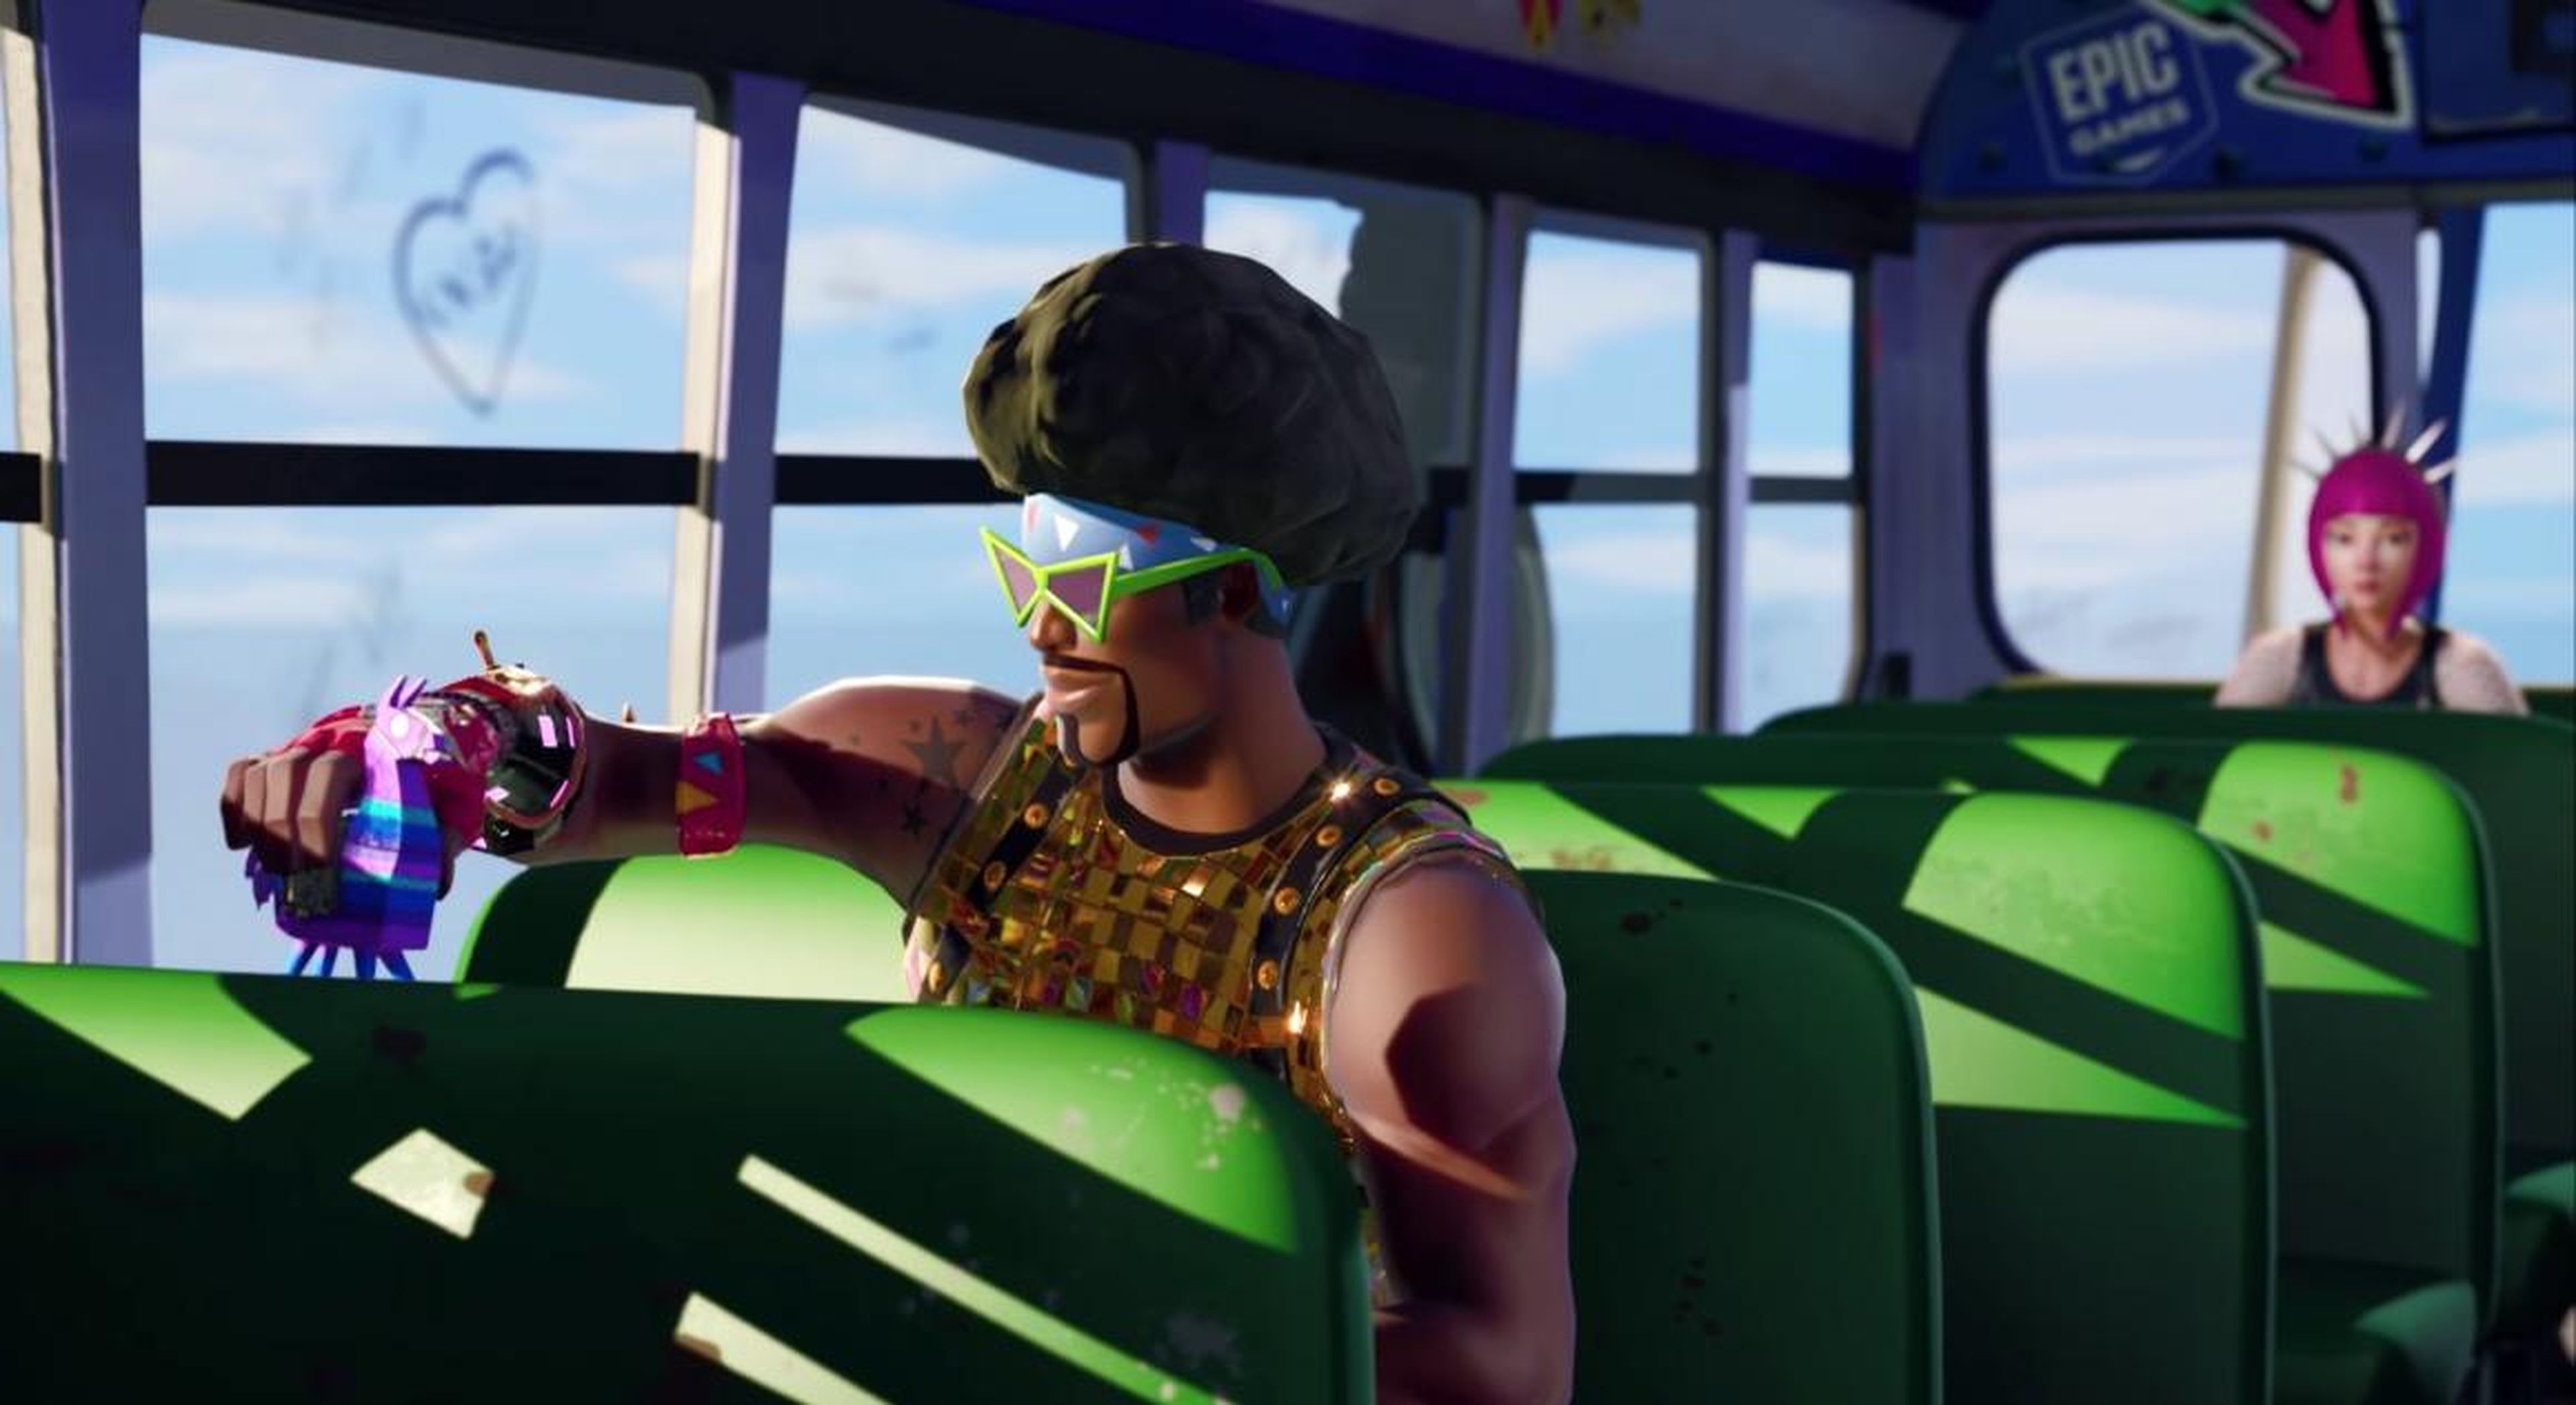 Sony gives in: After months of criticism, Sony is finally allowing 'Fortnite' players on PlayStation 4 to play with people on Xbox One and Nintendo Switch